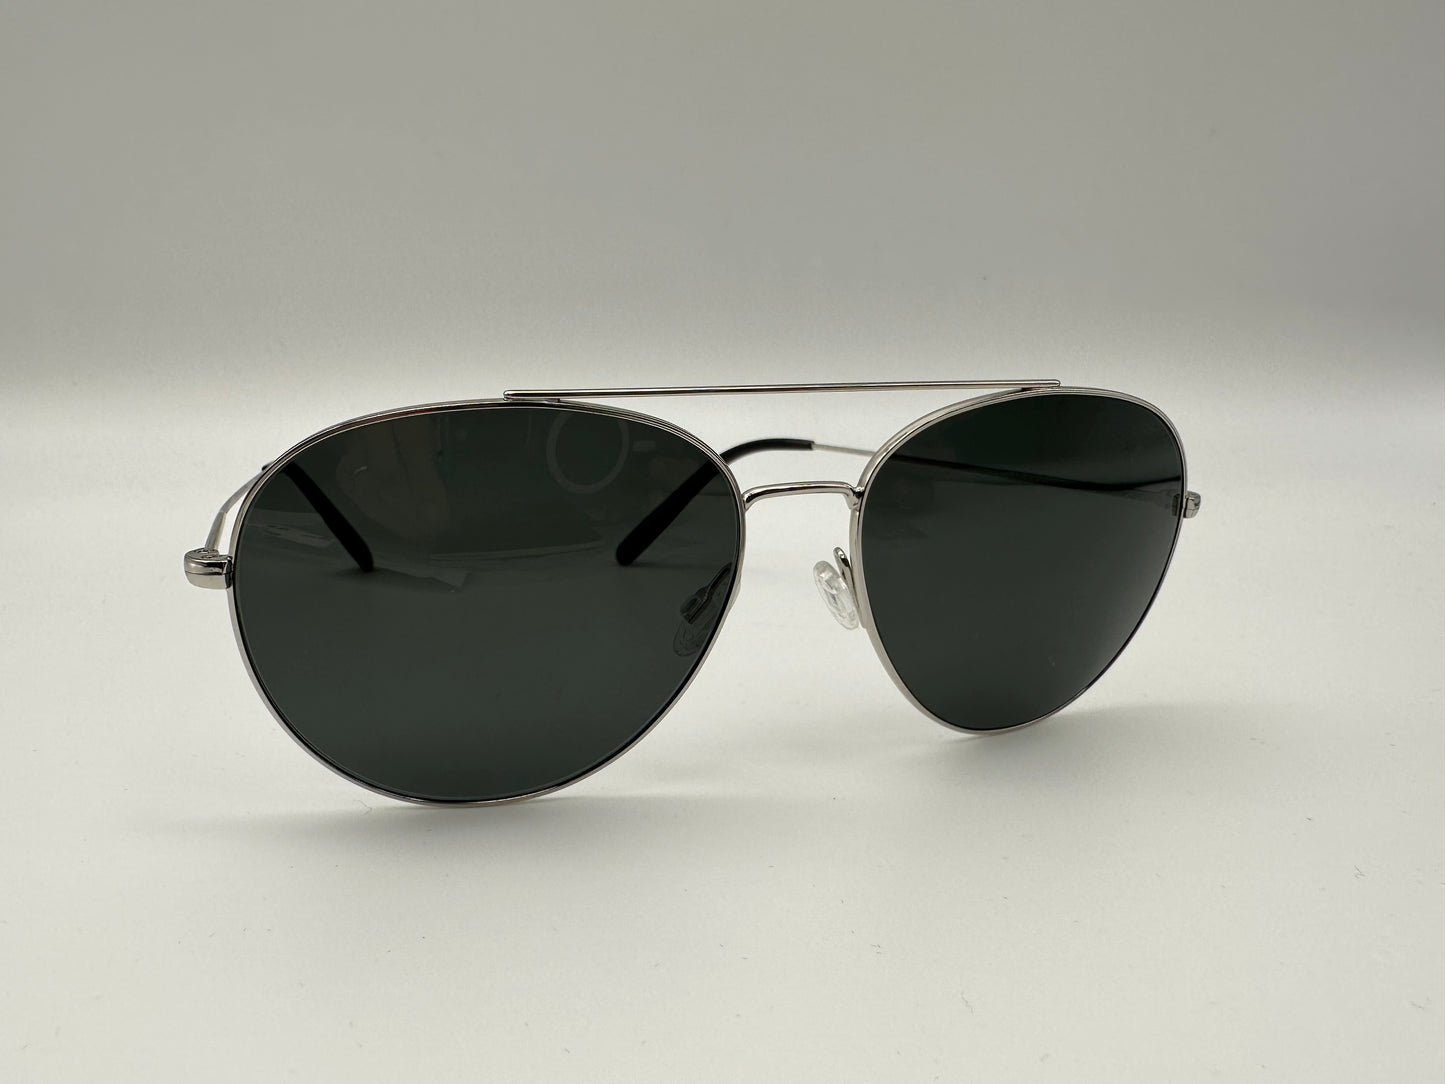 OLIVER PEOPLES Airdale Aviator 58mm in Midnight Express Polarized MSRP $511